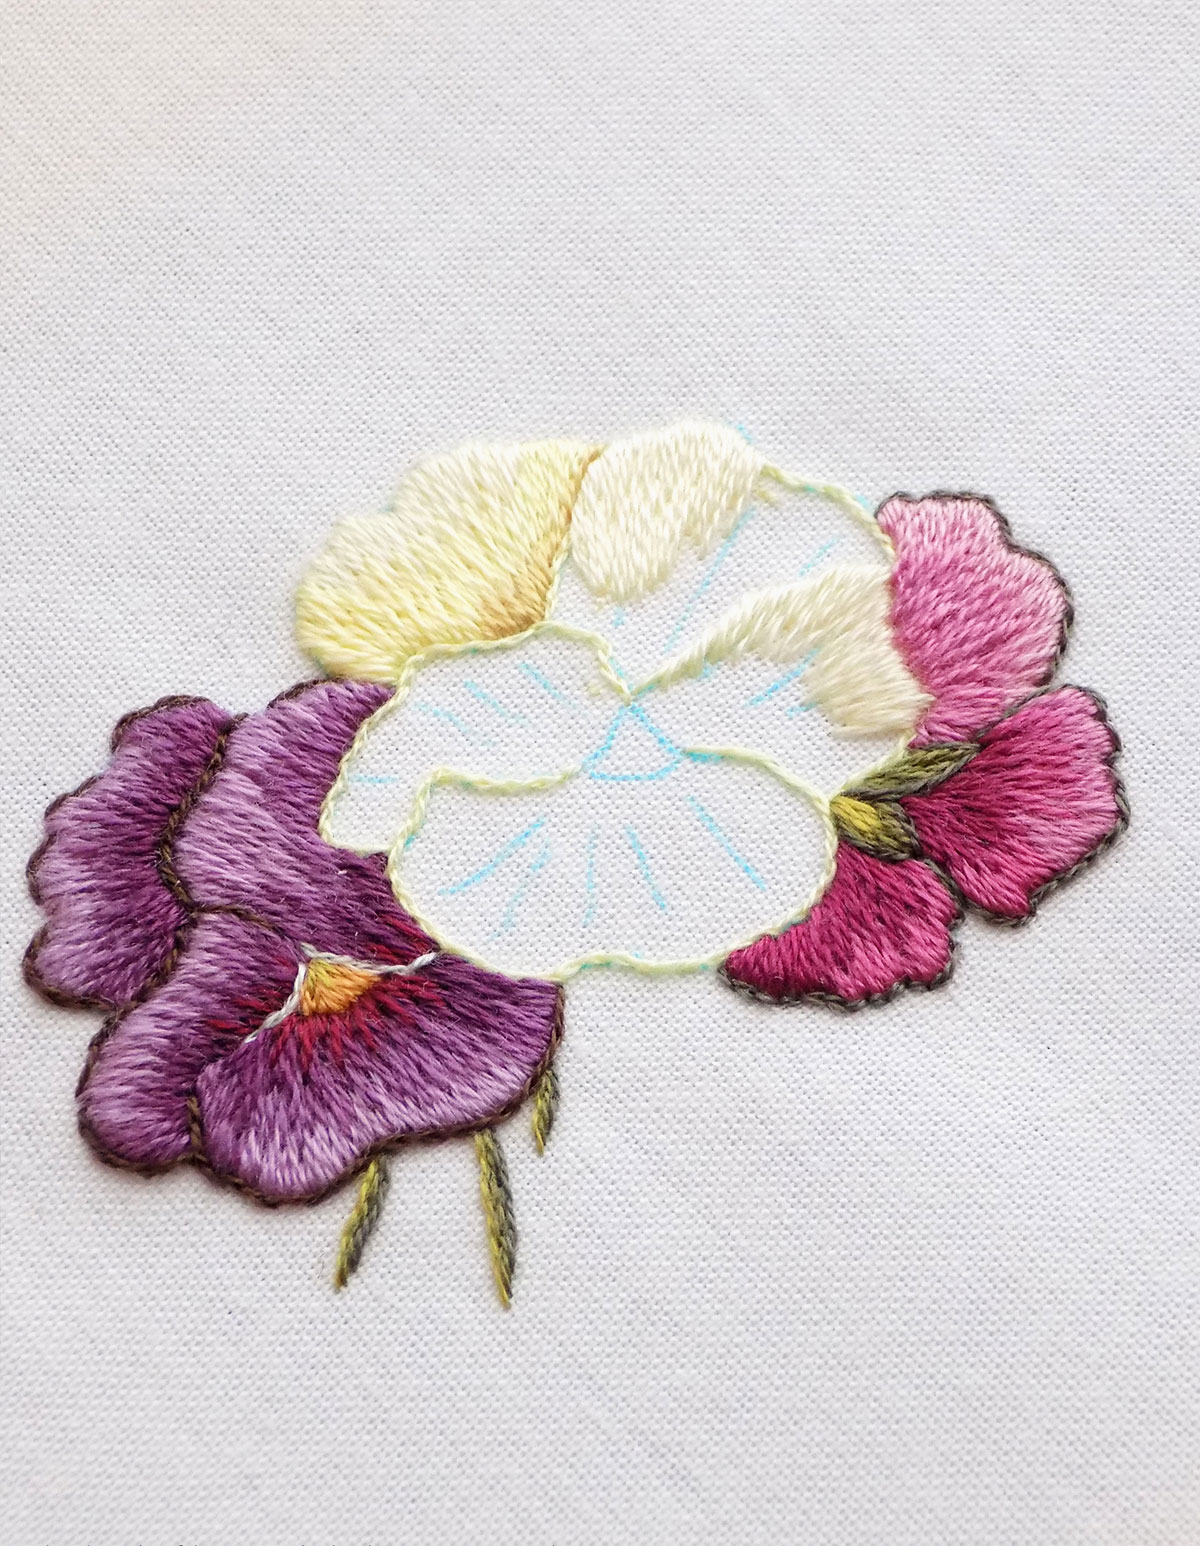 10 basic stitches for hand embroidery Stitch Floral